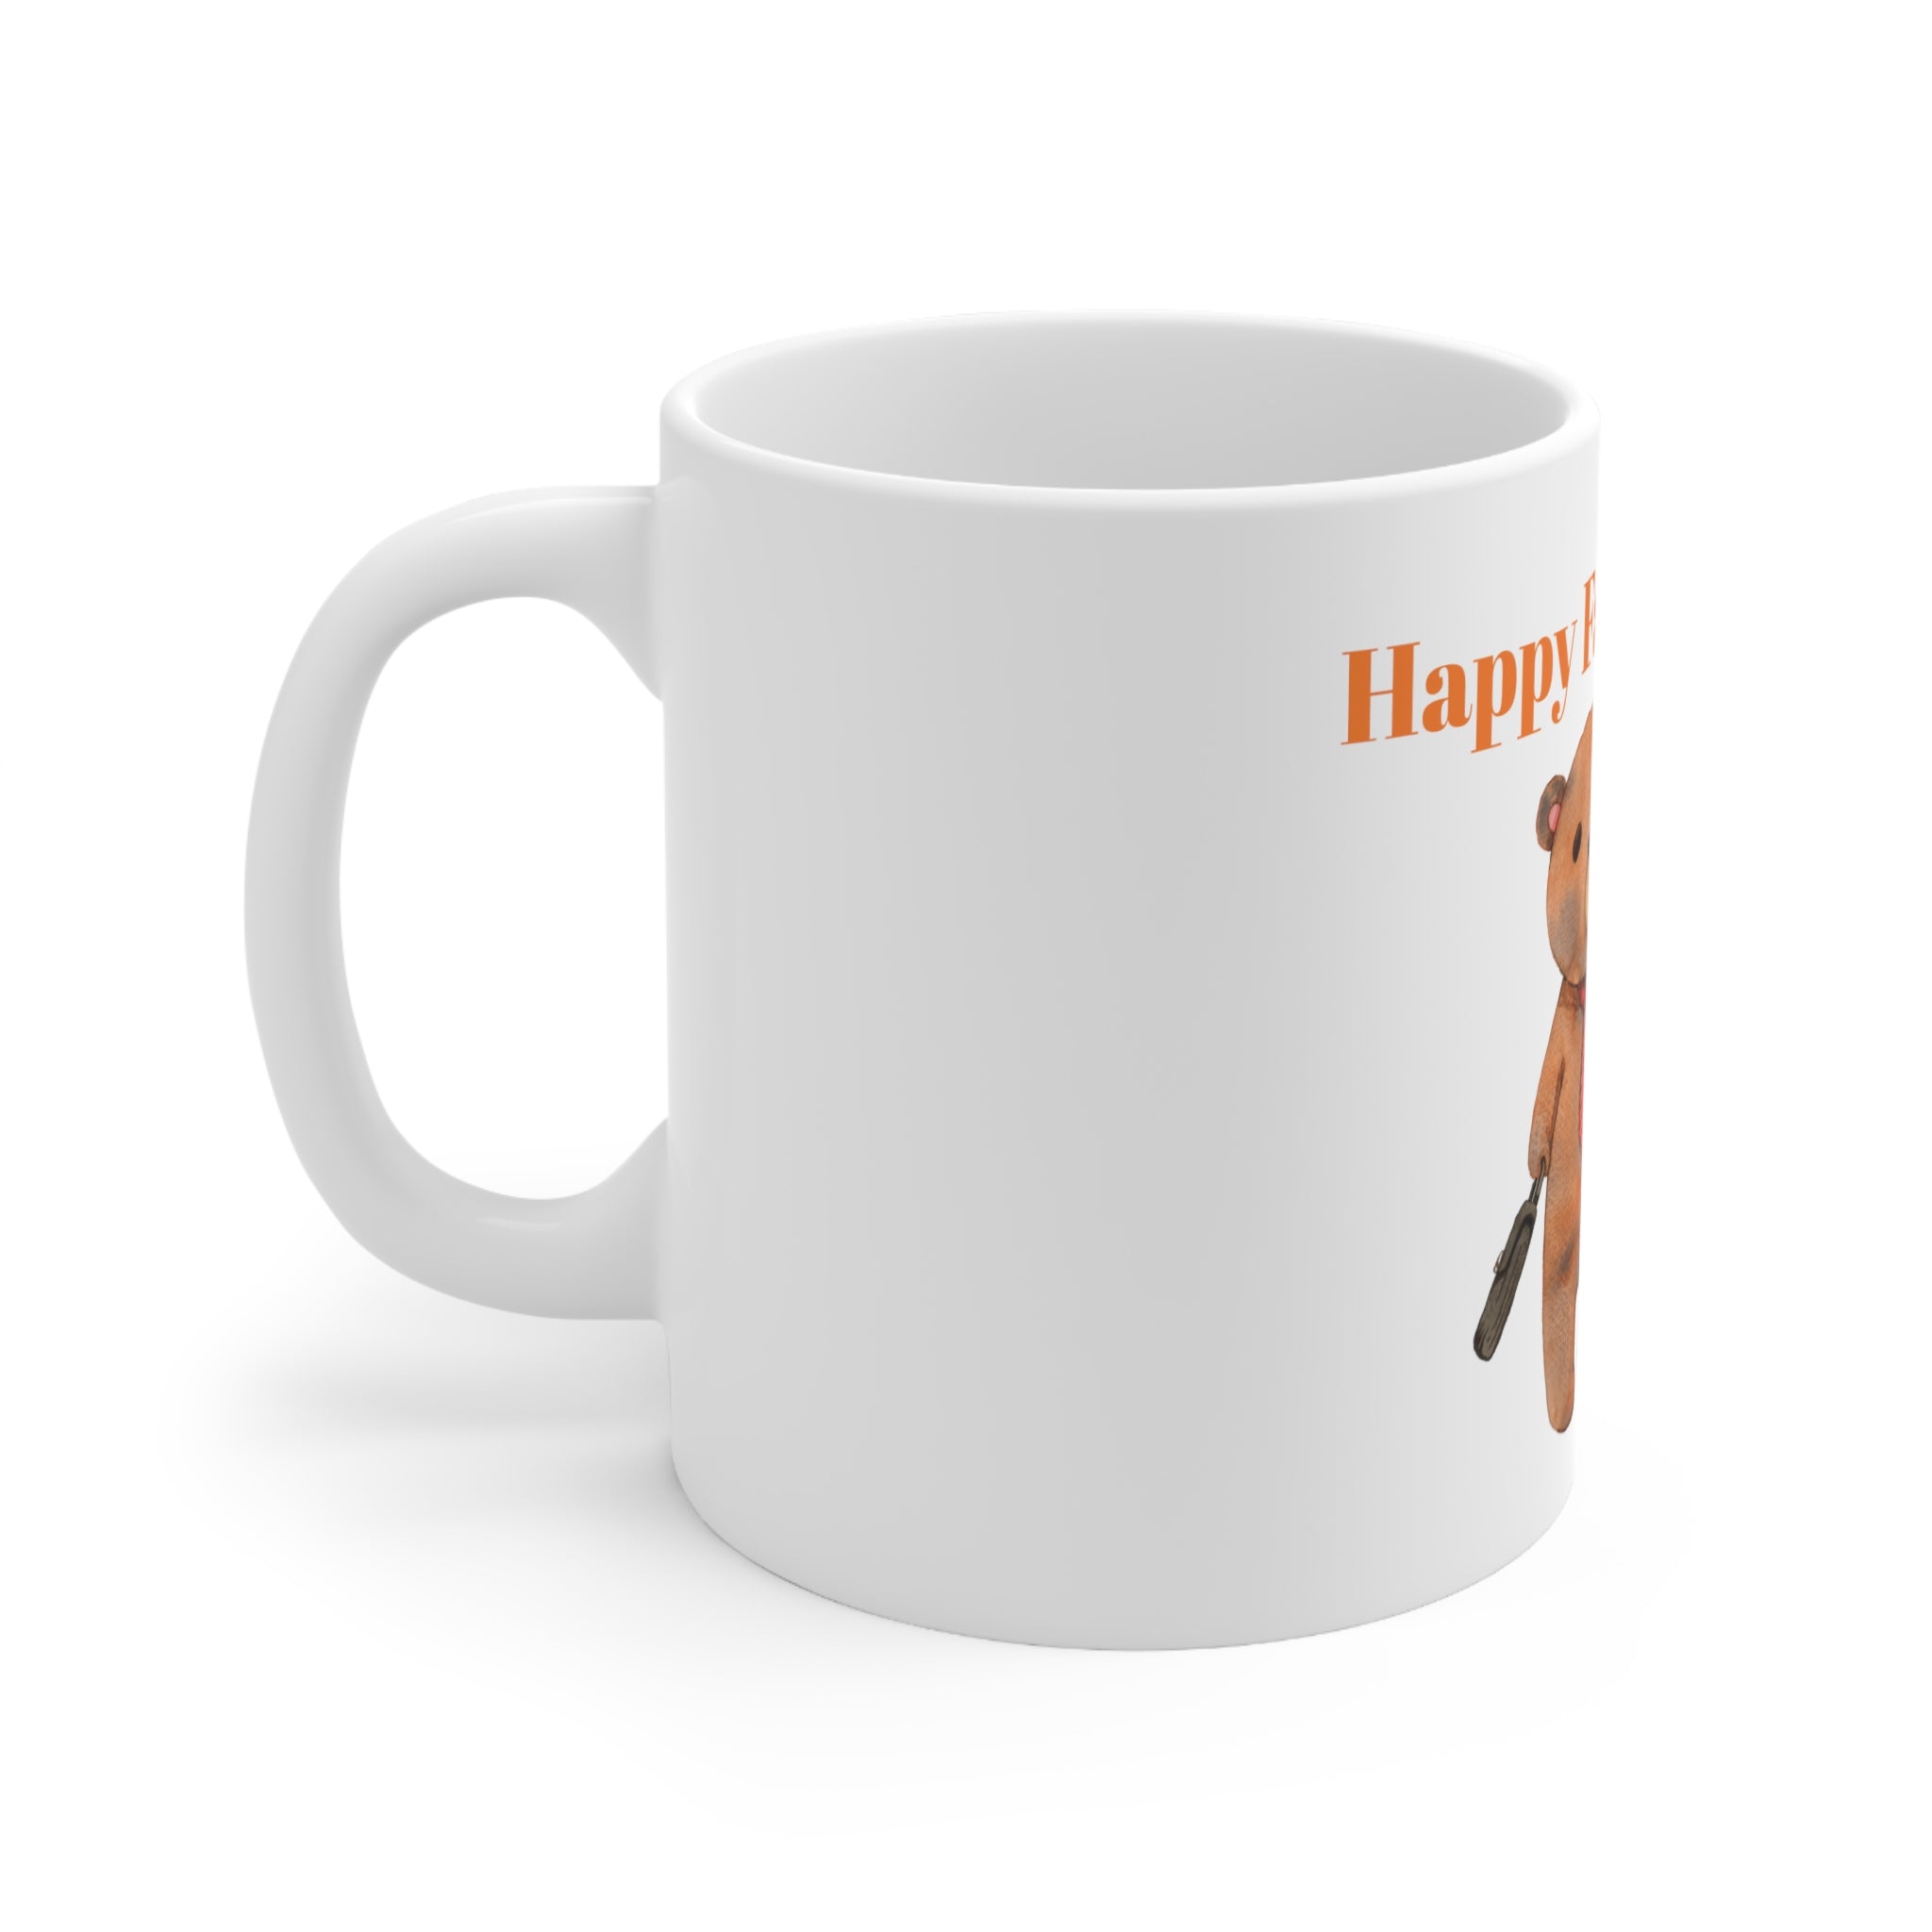 Ceramic Mug 11oz - Happy Fathers Day!! - Featuring Heartwarming Bear and Cub Design - Perfect Gift for Celebrating Fatherhood"